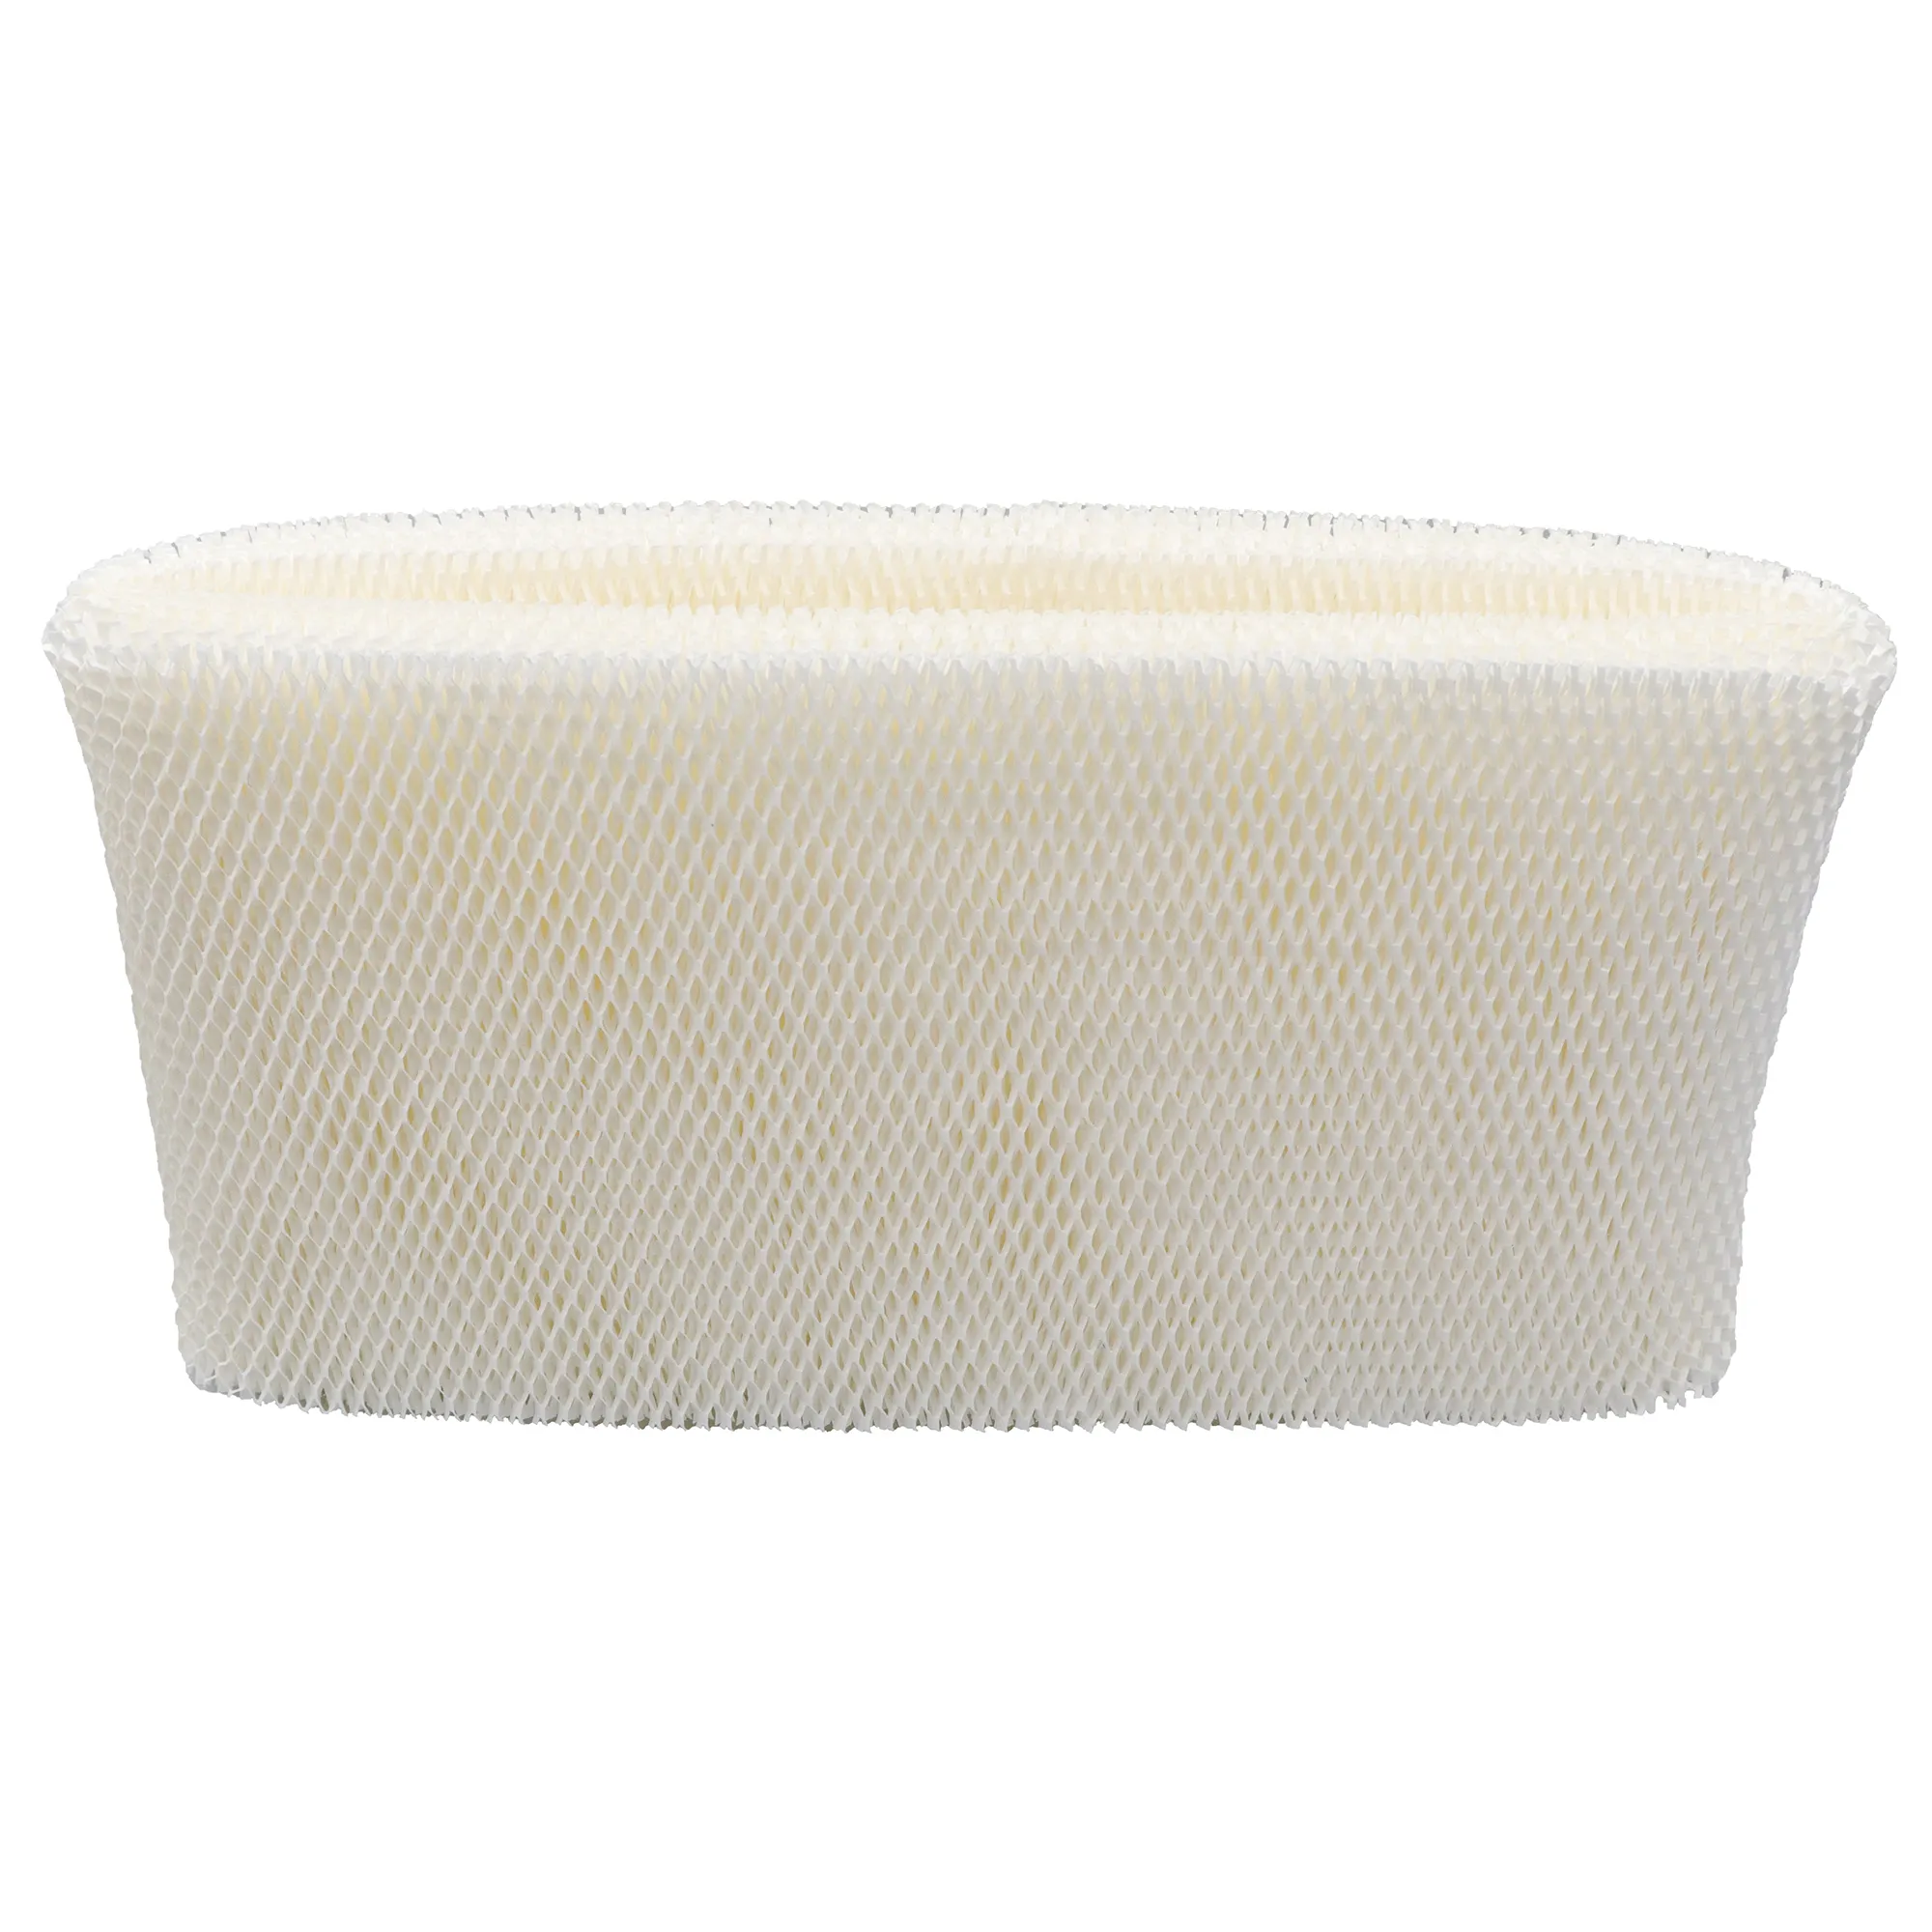 Replacement Filter For Honeywells Filter E HCM6009 HCM-6011 HEV680 Humidifier Filters